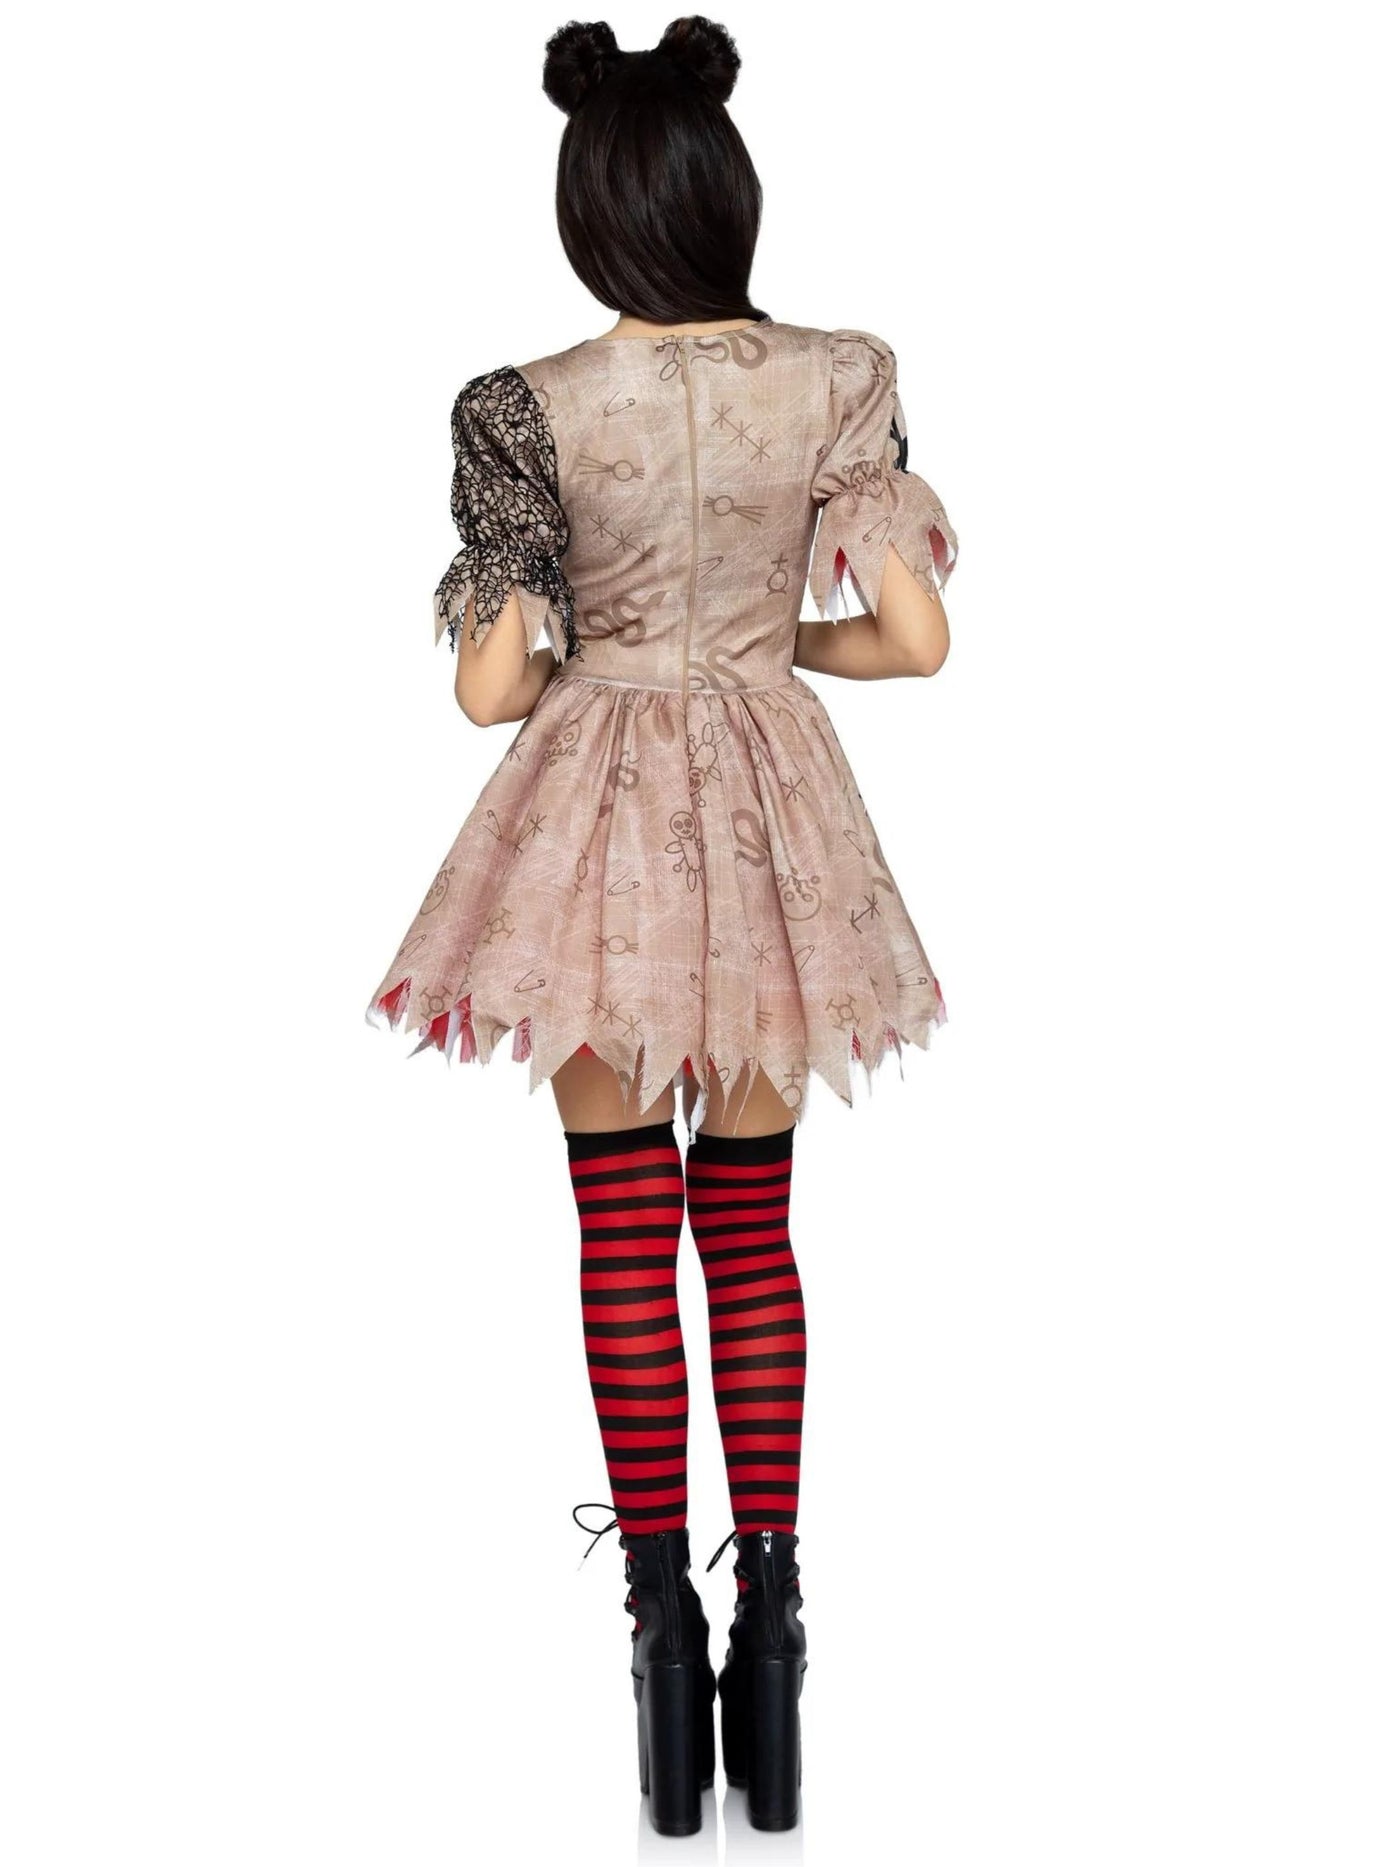 Womens Deadly Voodoo Doll Costume